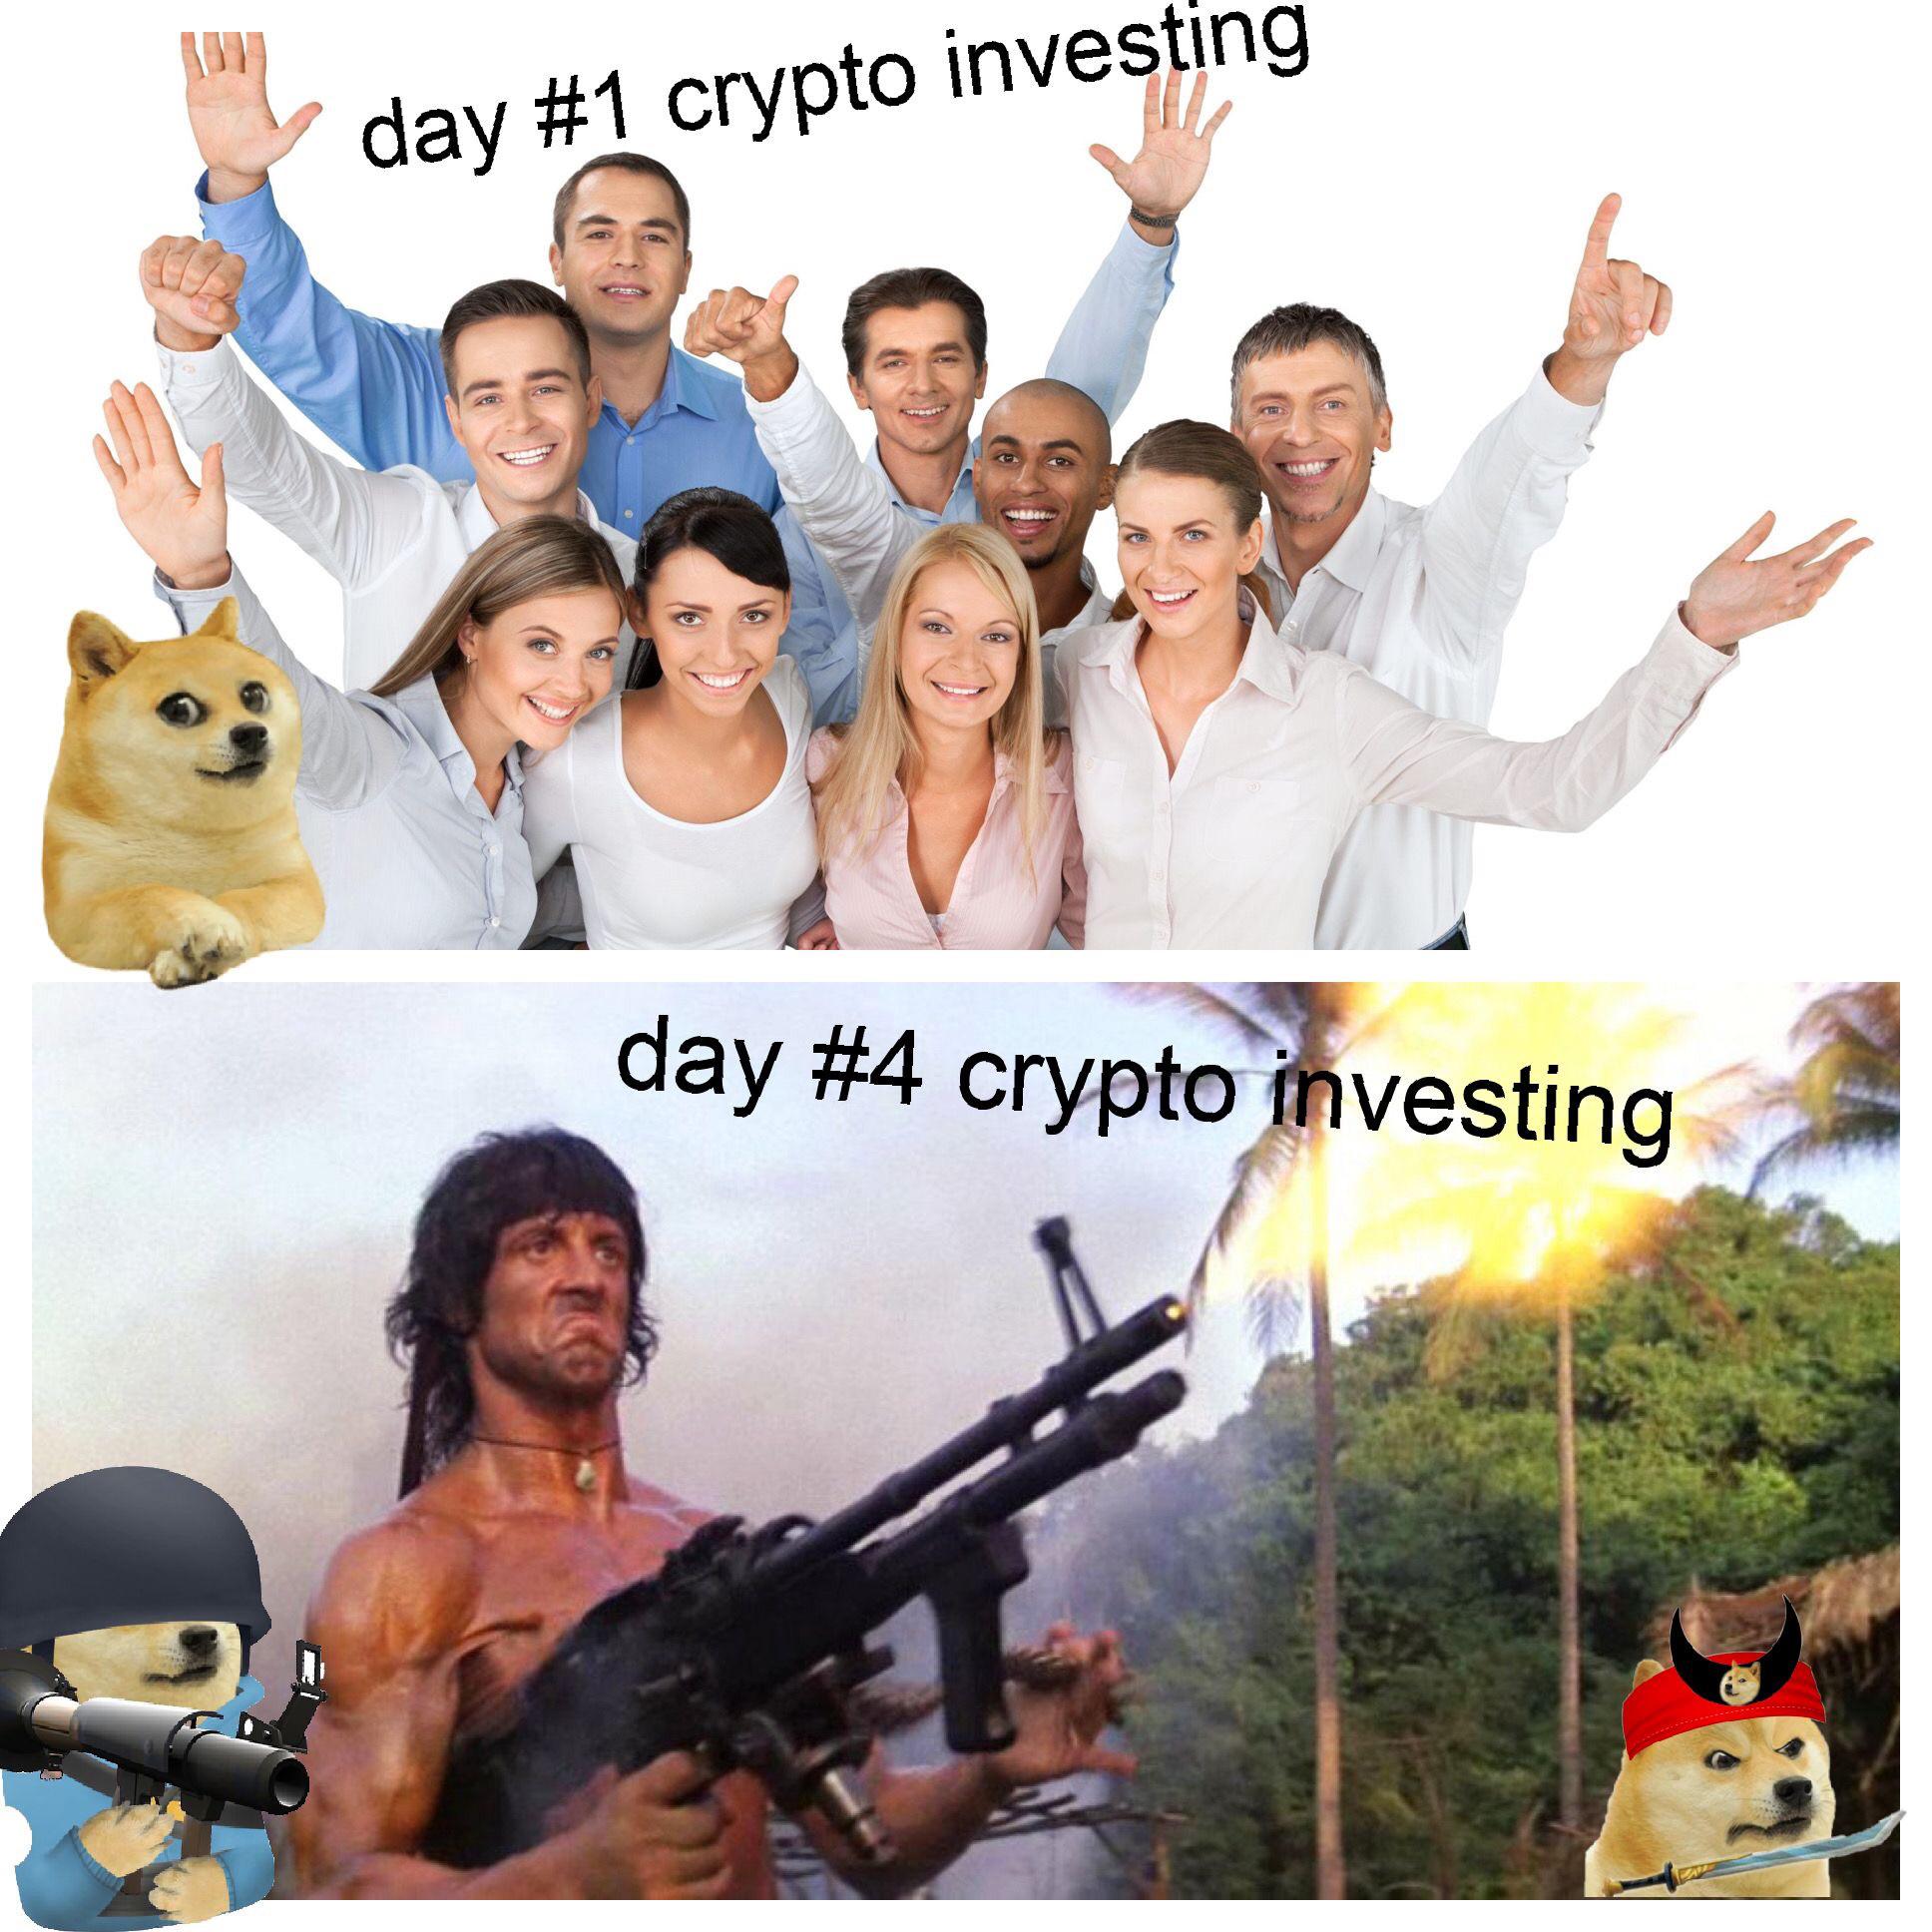 funny memes - wii guns memes - day crypto investing do day crypto investing